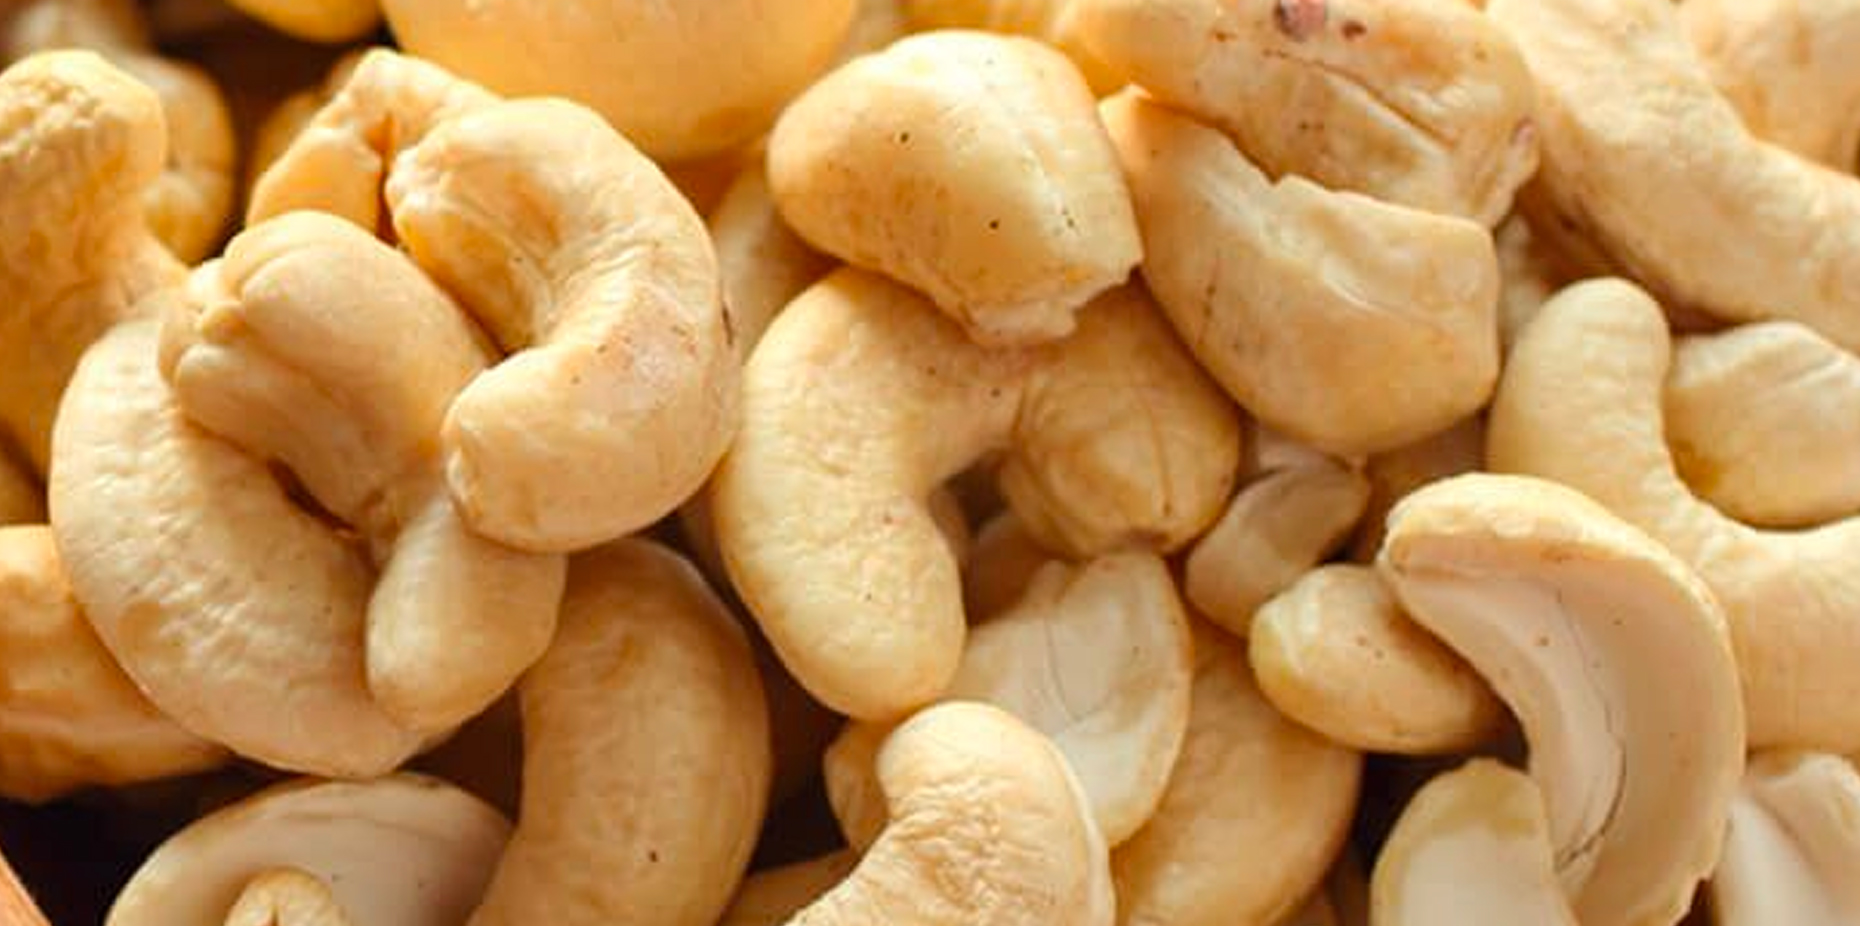 7 Health benefits of Cashews, and Potential Risks